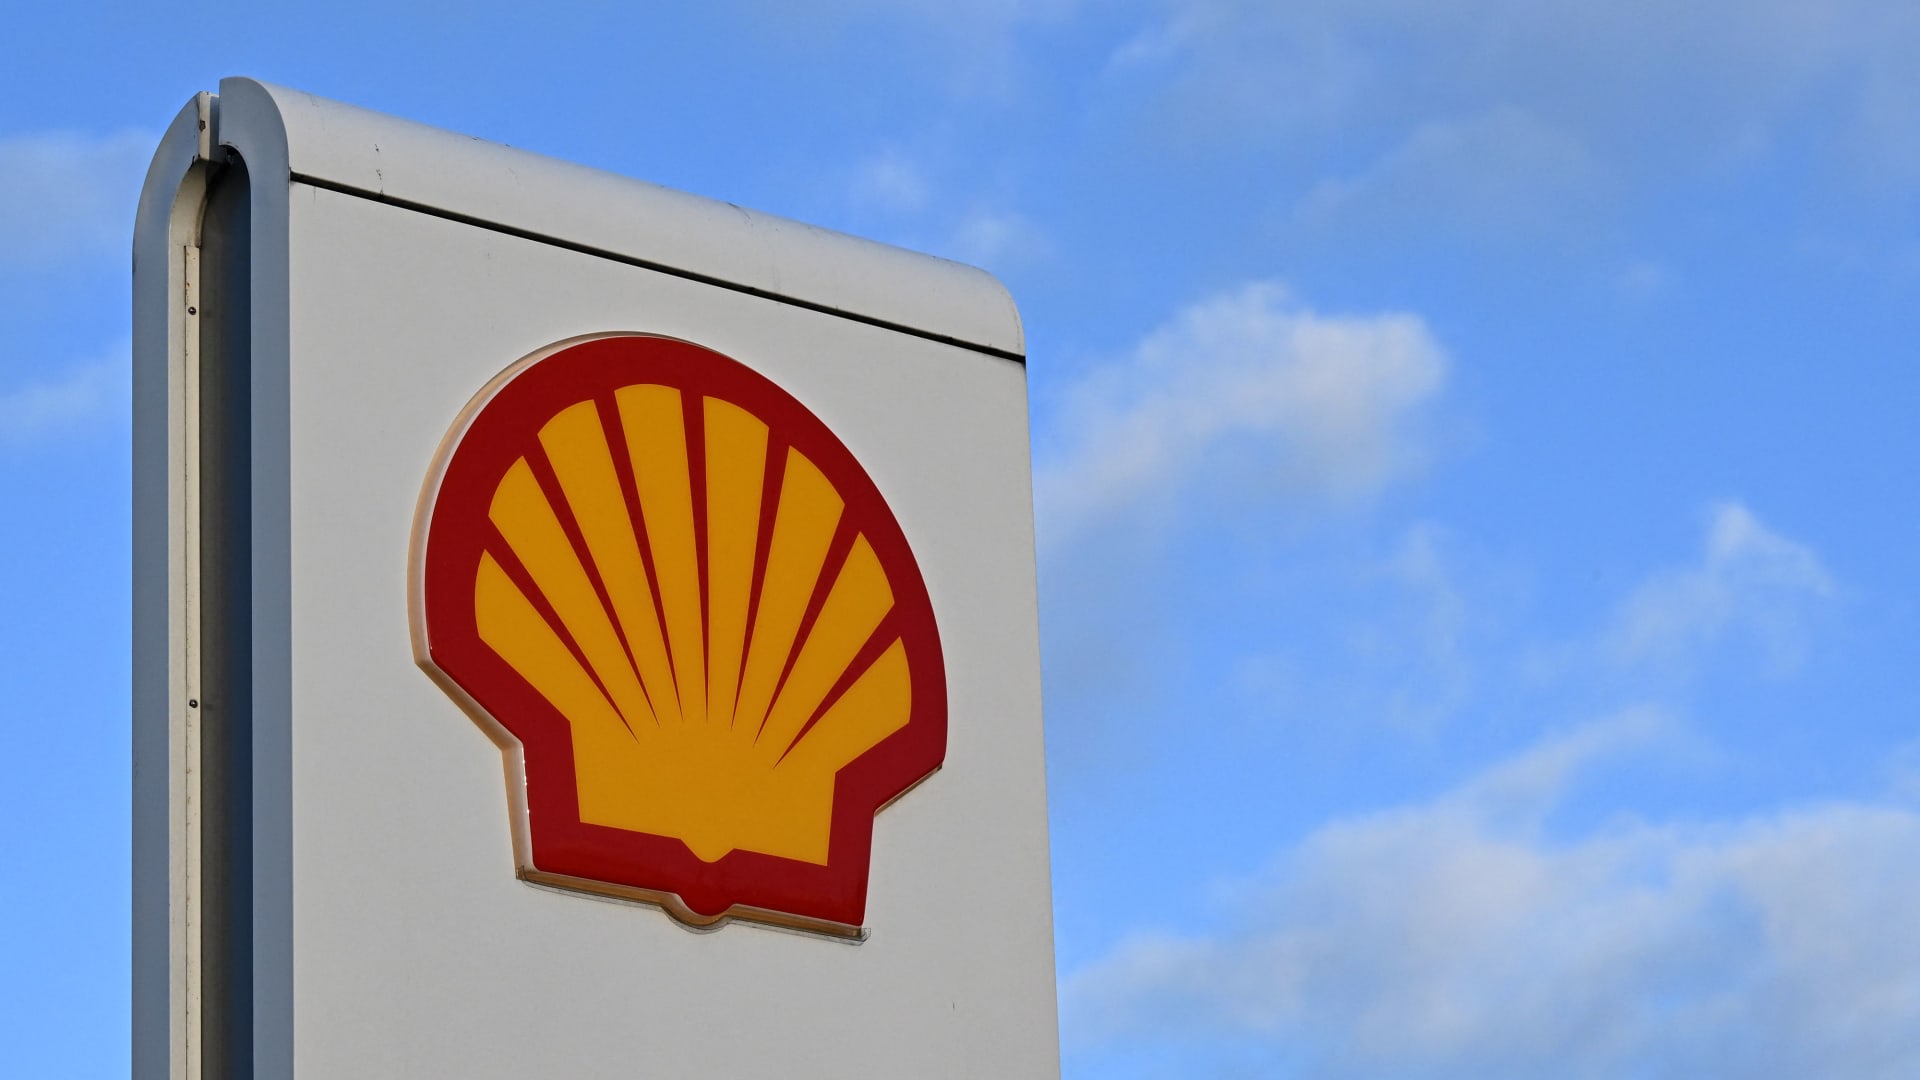 Shell’s board of directors sued over climate strategy in a first-of-its-kind lawsuit